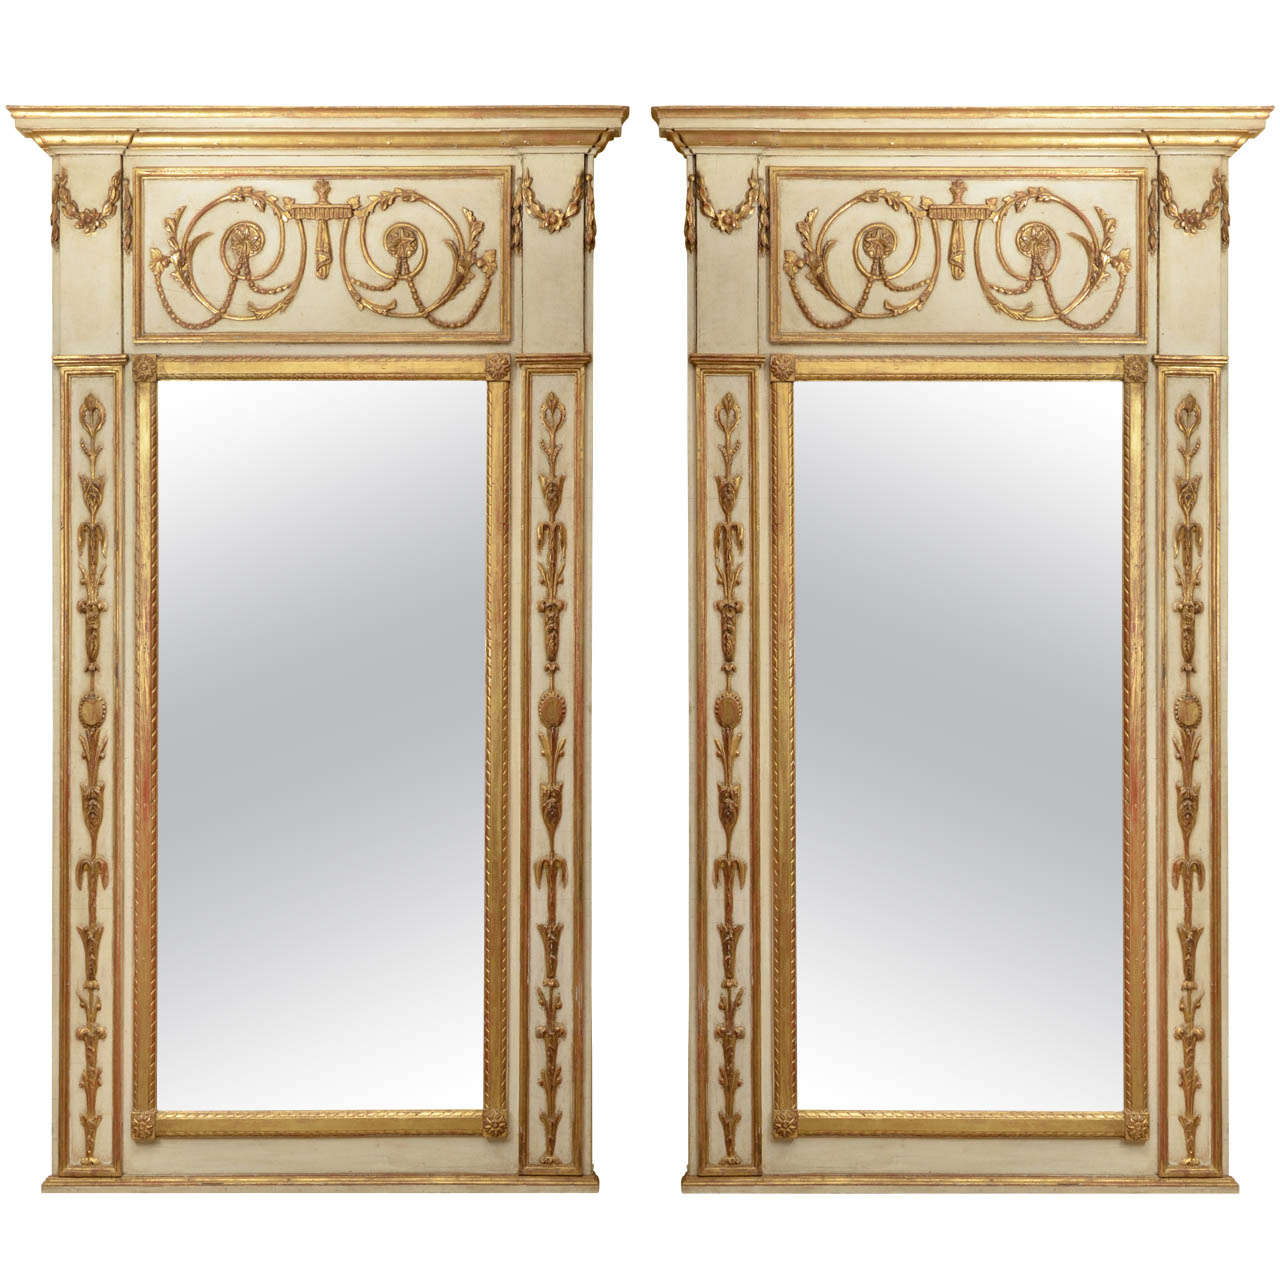 Pair of Swedish Regency Style Painted Gilt Wooden Carved Mirrors